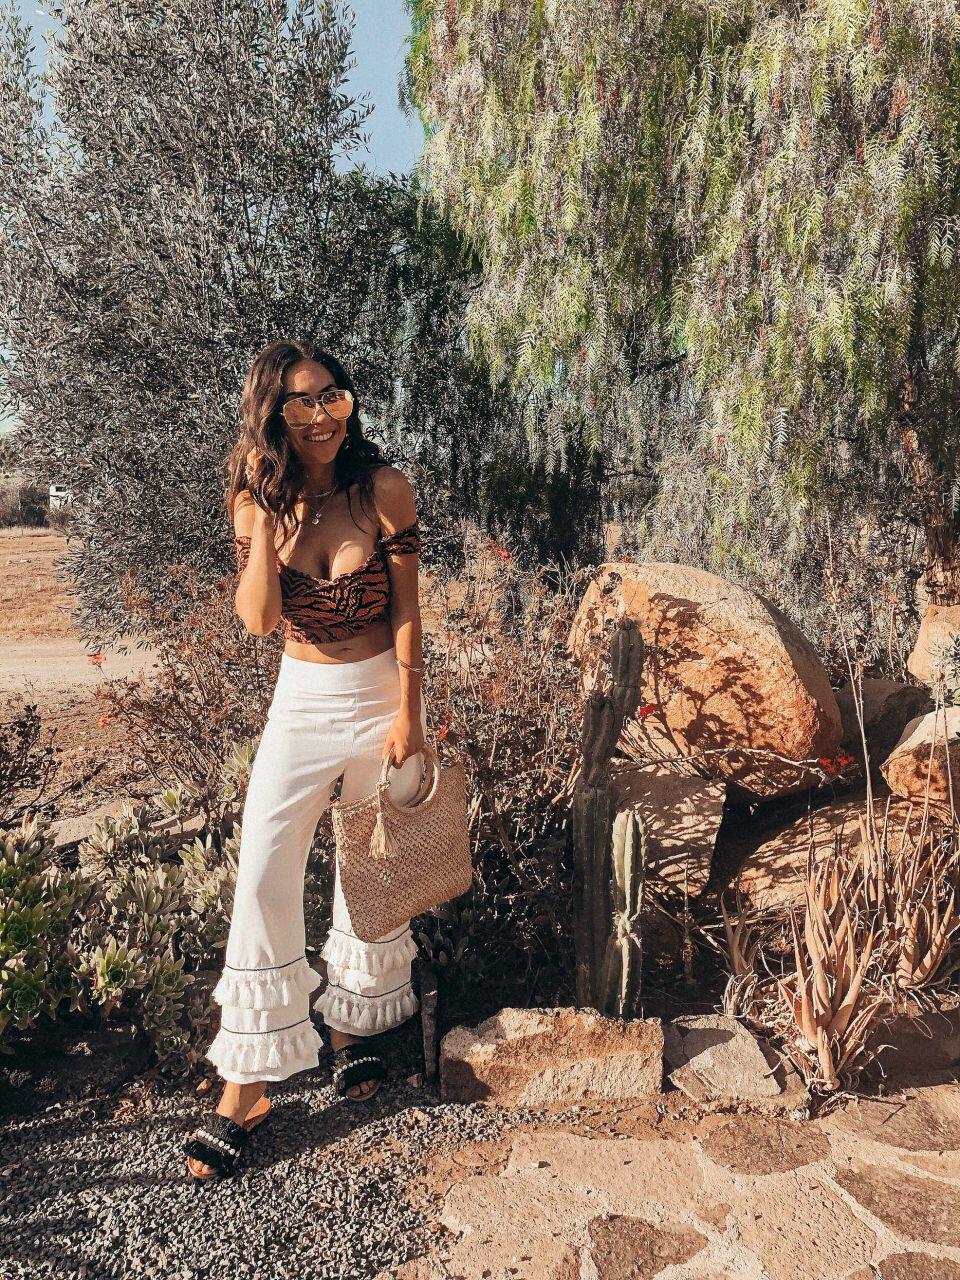 Style_with_nihan_river_island_leopard_print_crop_top_quay_sunglasses_hat_attack_straw_bag_valle_de_guadalupe_laja_restaurant_mexico